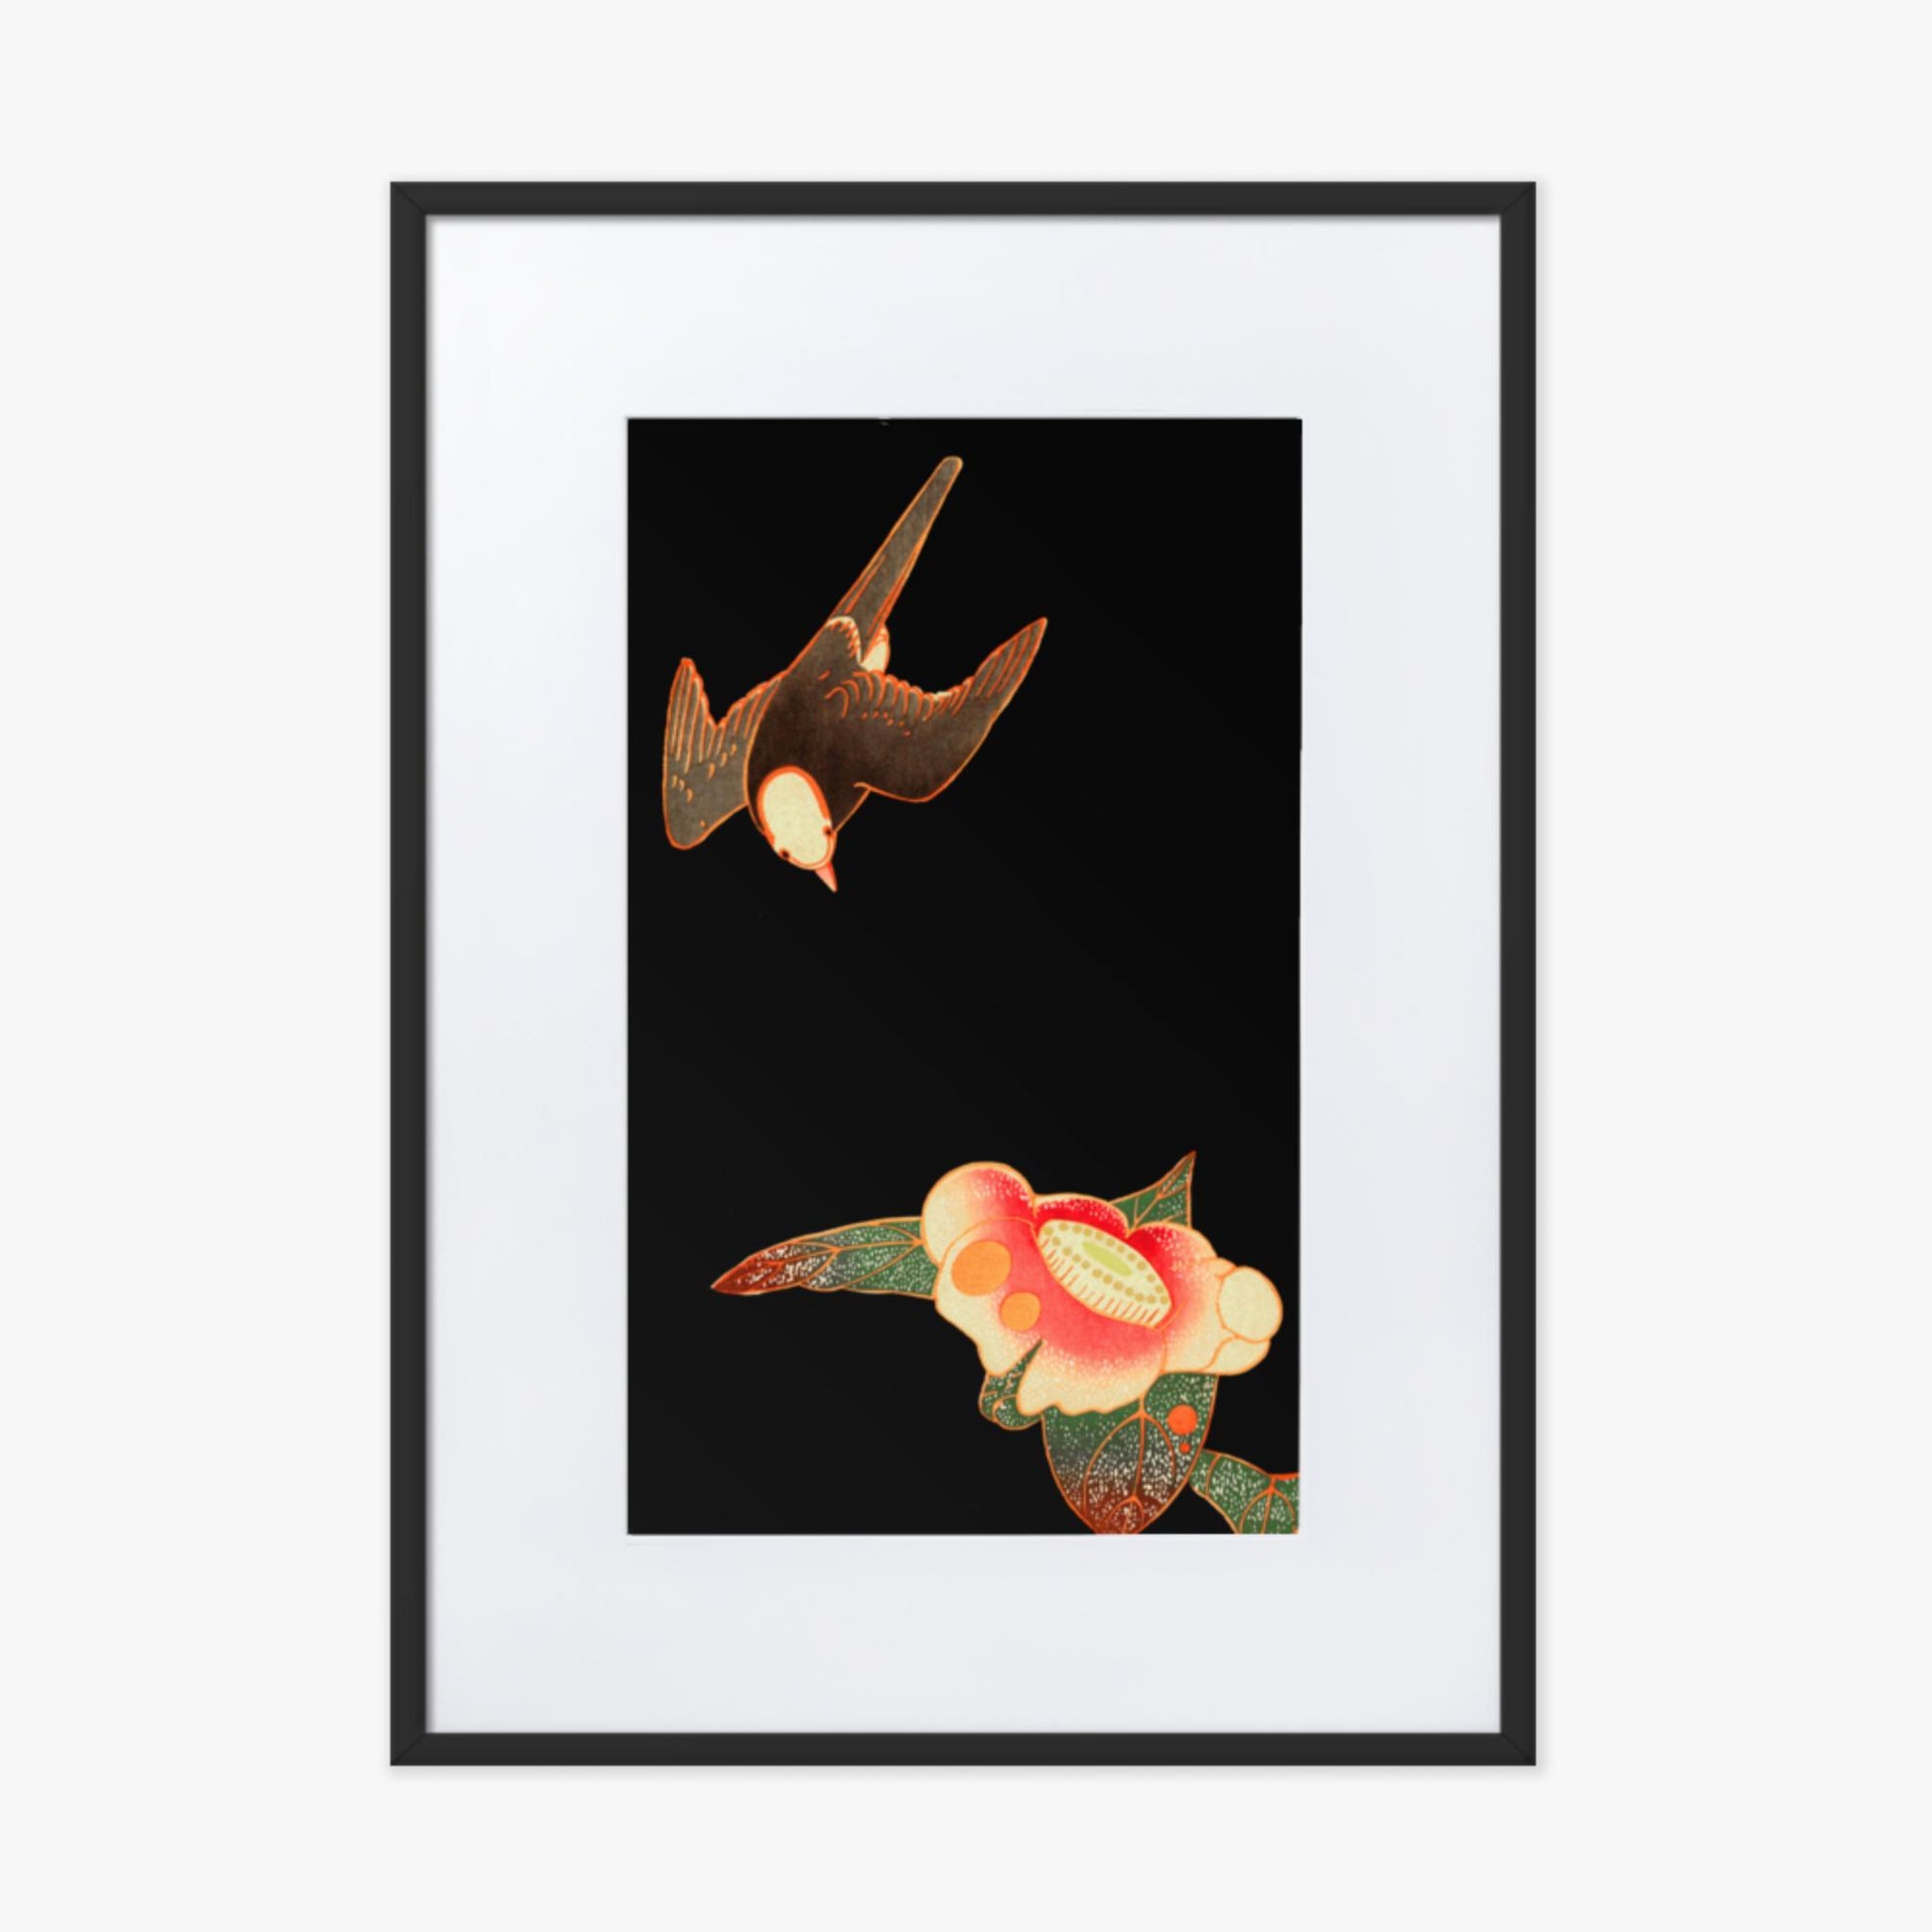 Ito Jakuchu - Swallow and Camellia 50x70 cm Poster With Black Frame